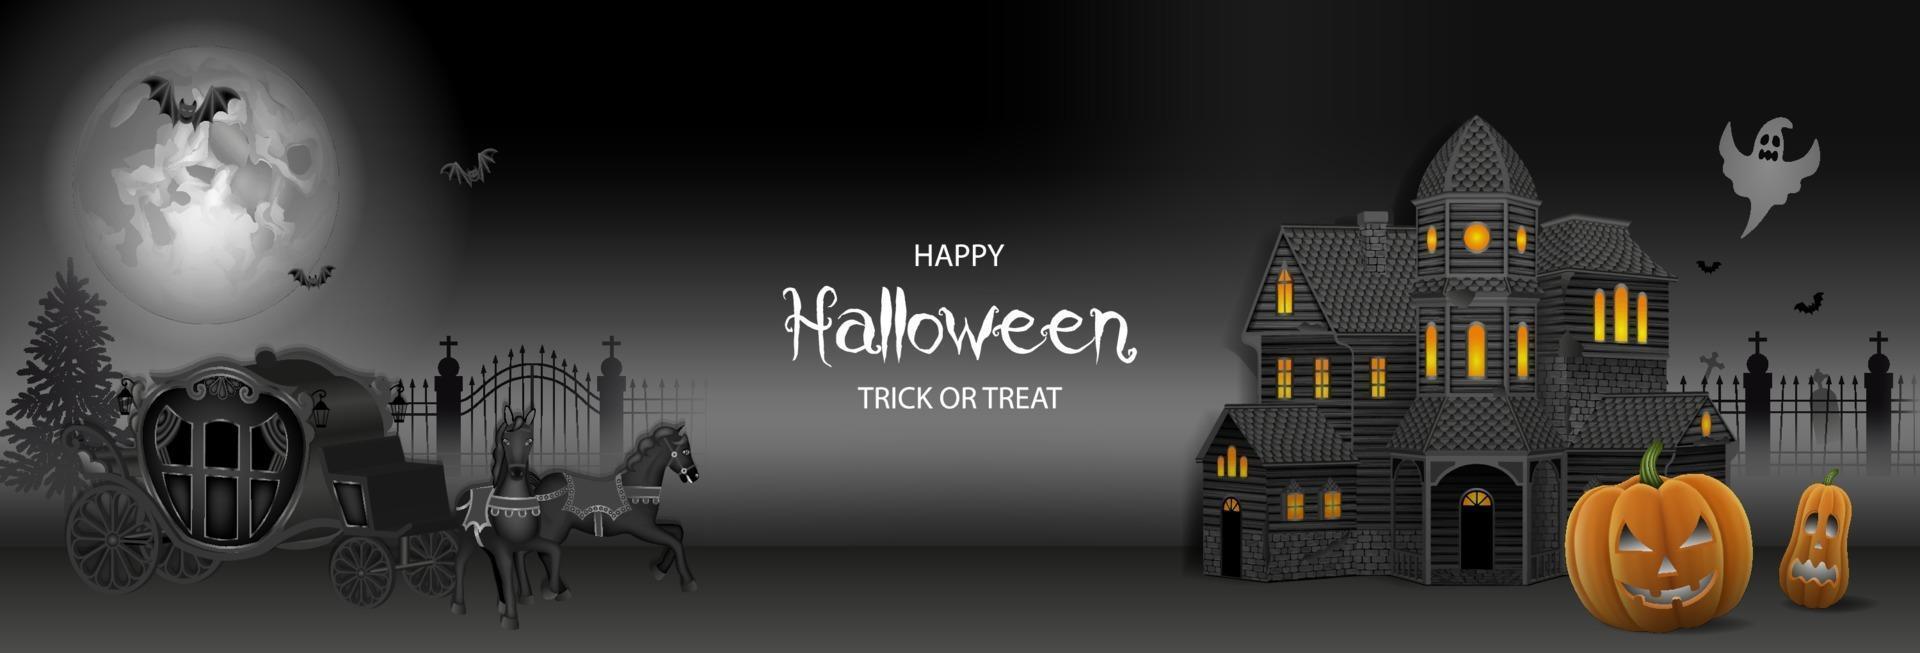 halloween banner with haunted house, pumpkins and old carriage vector